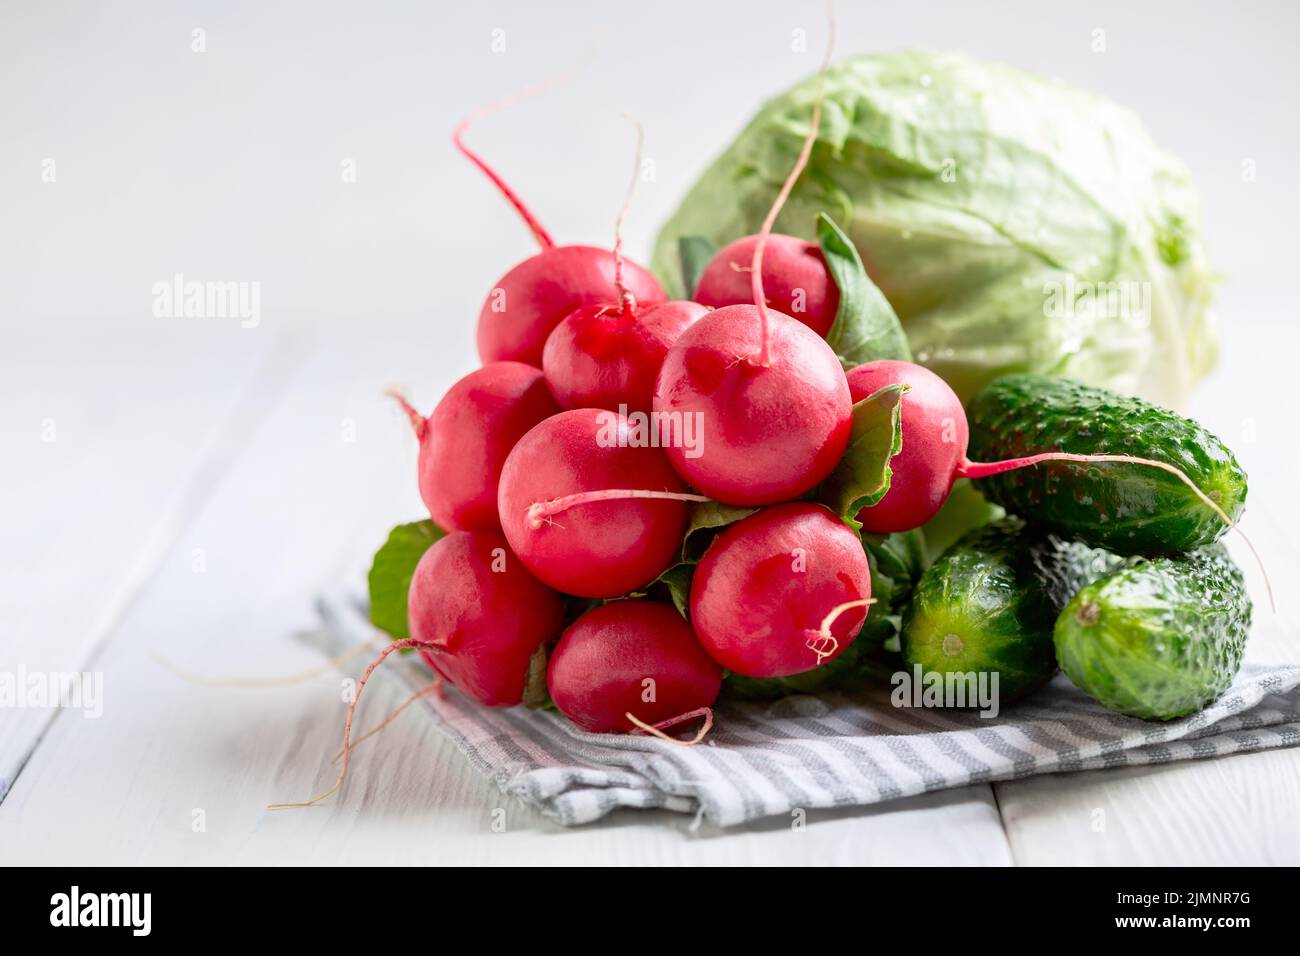 Radishes, cucumbers and cabbage in close-up. Stock Photo